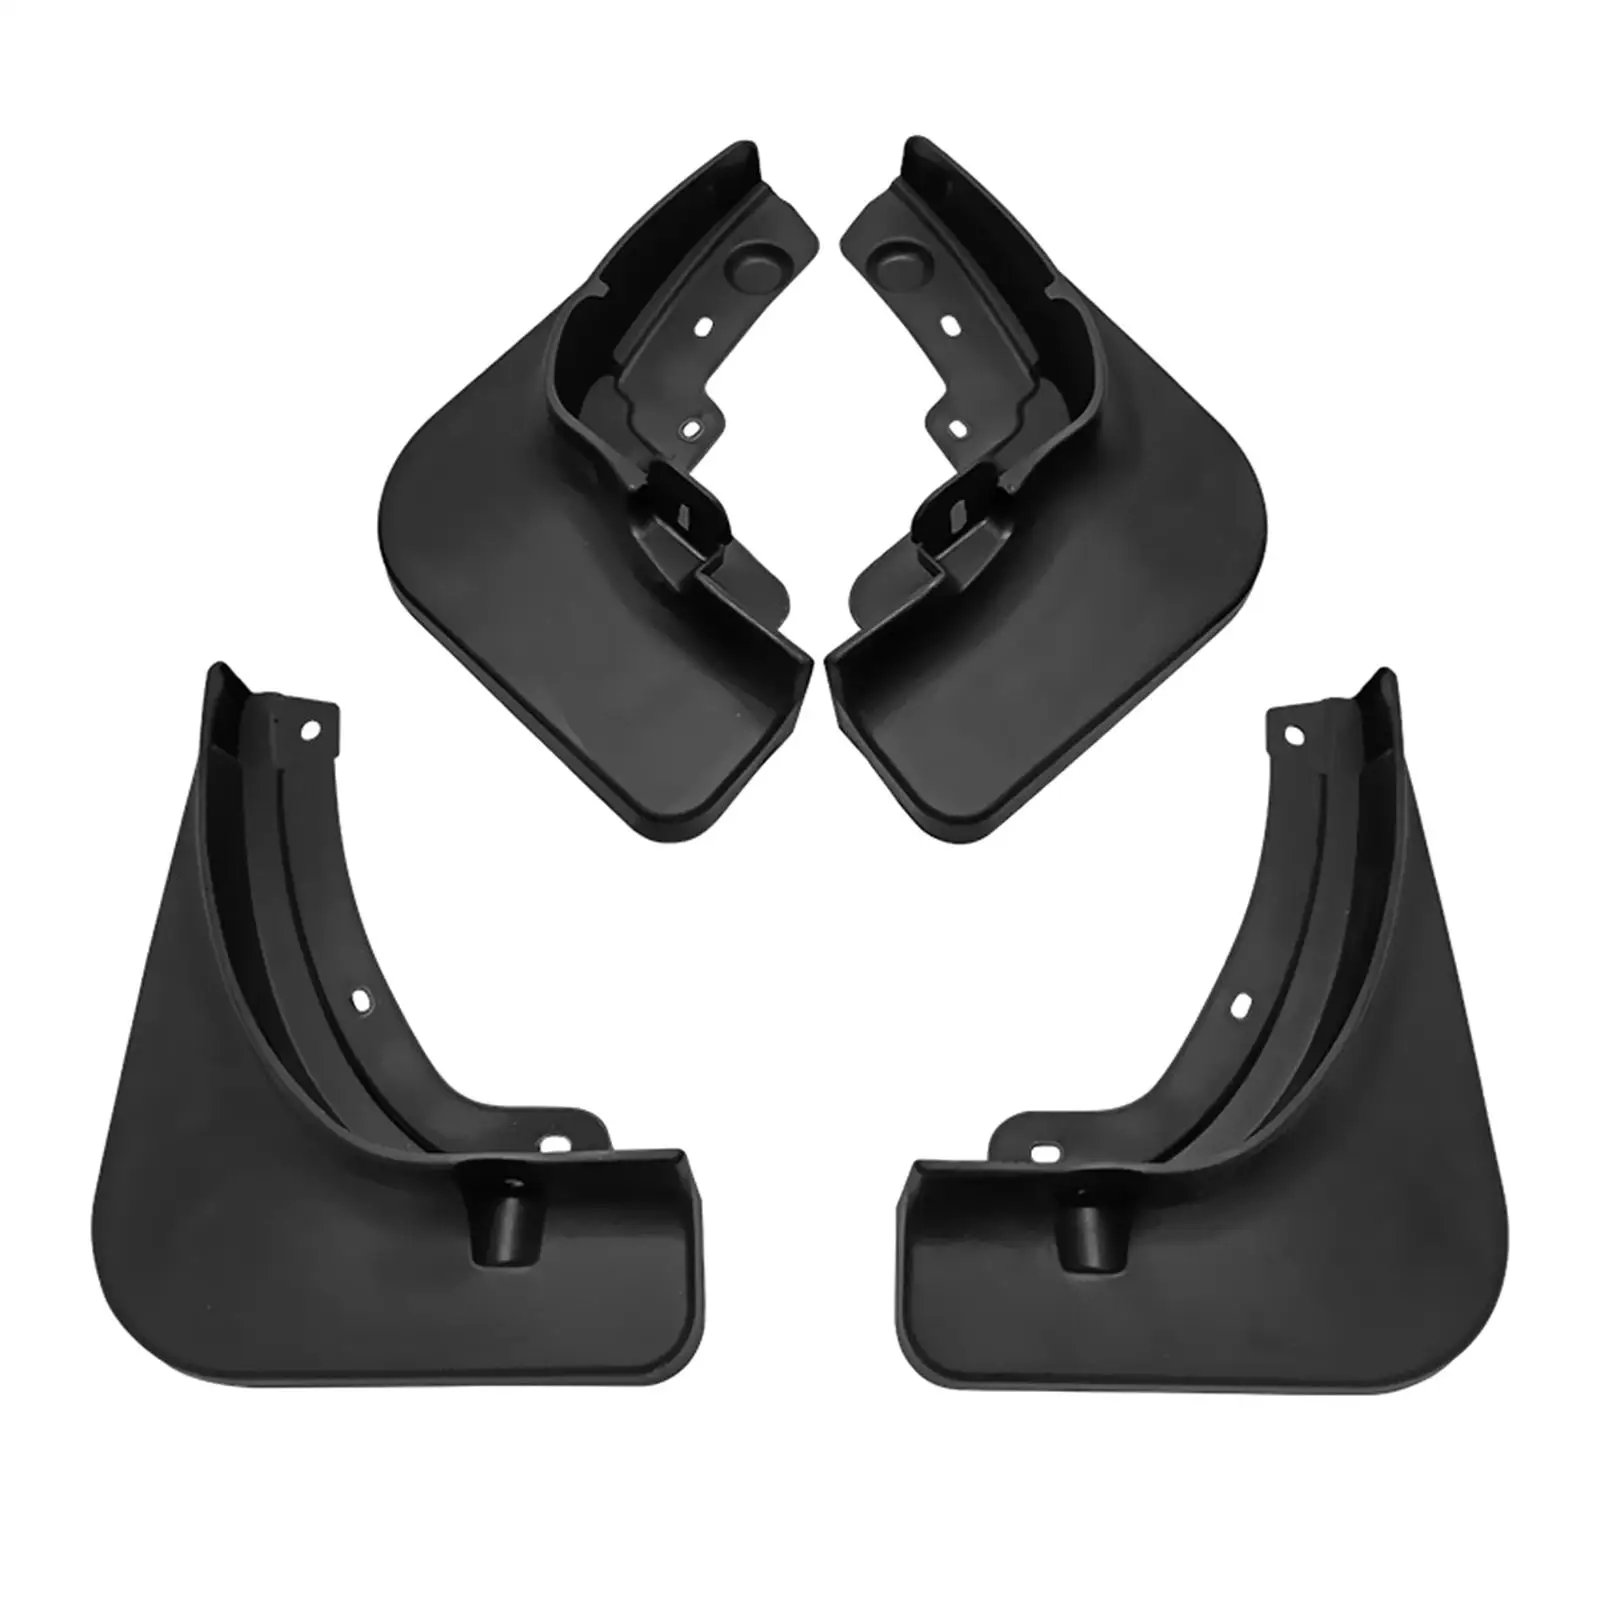 4x Vehicle Mud Flaps Front and Rear Splash Guards Fender Mudflaps Mudguard for